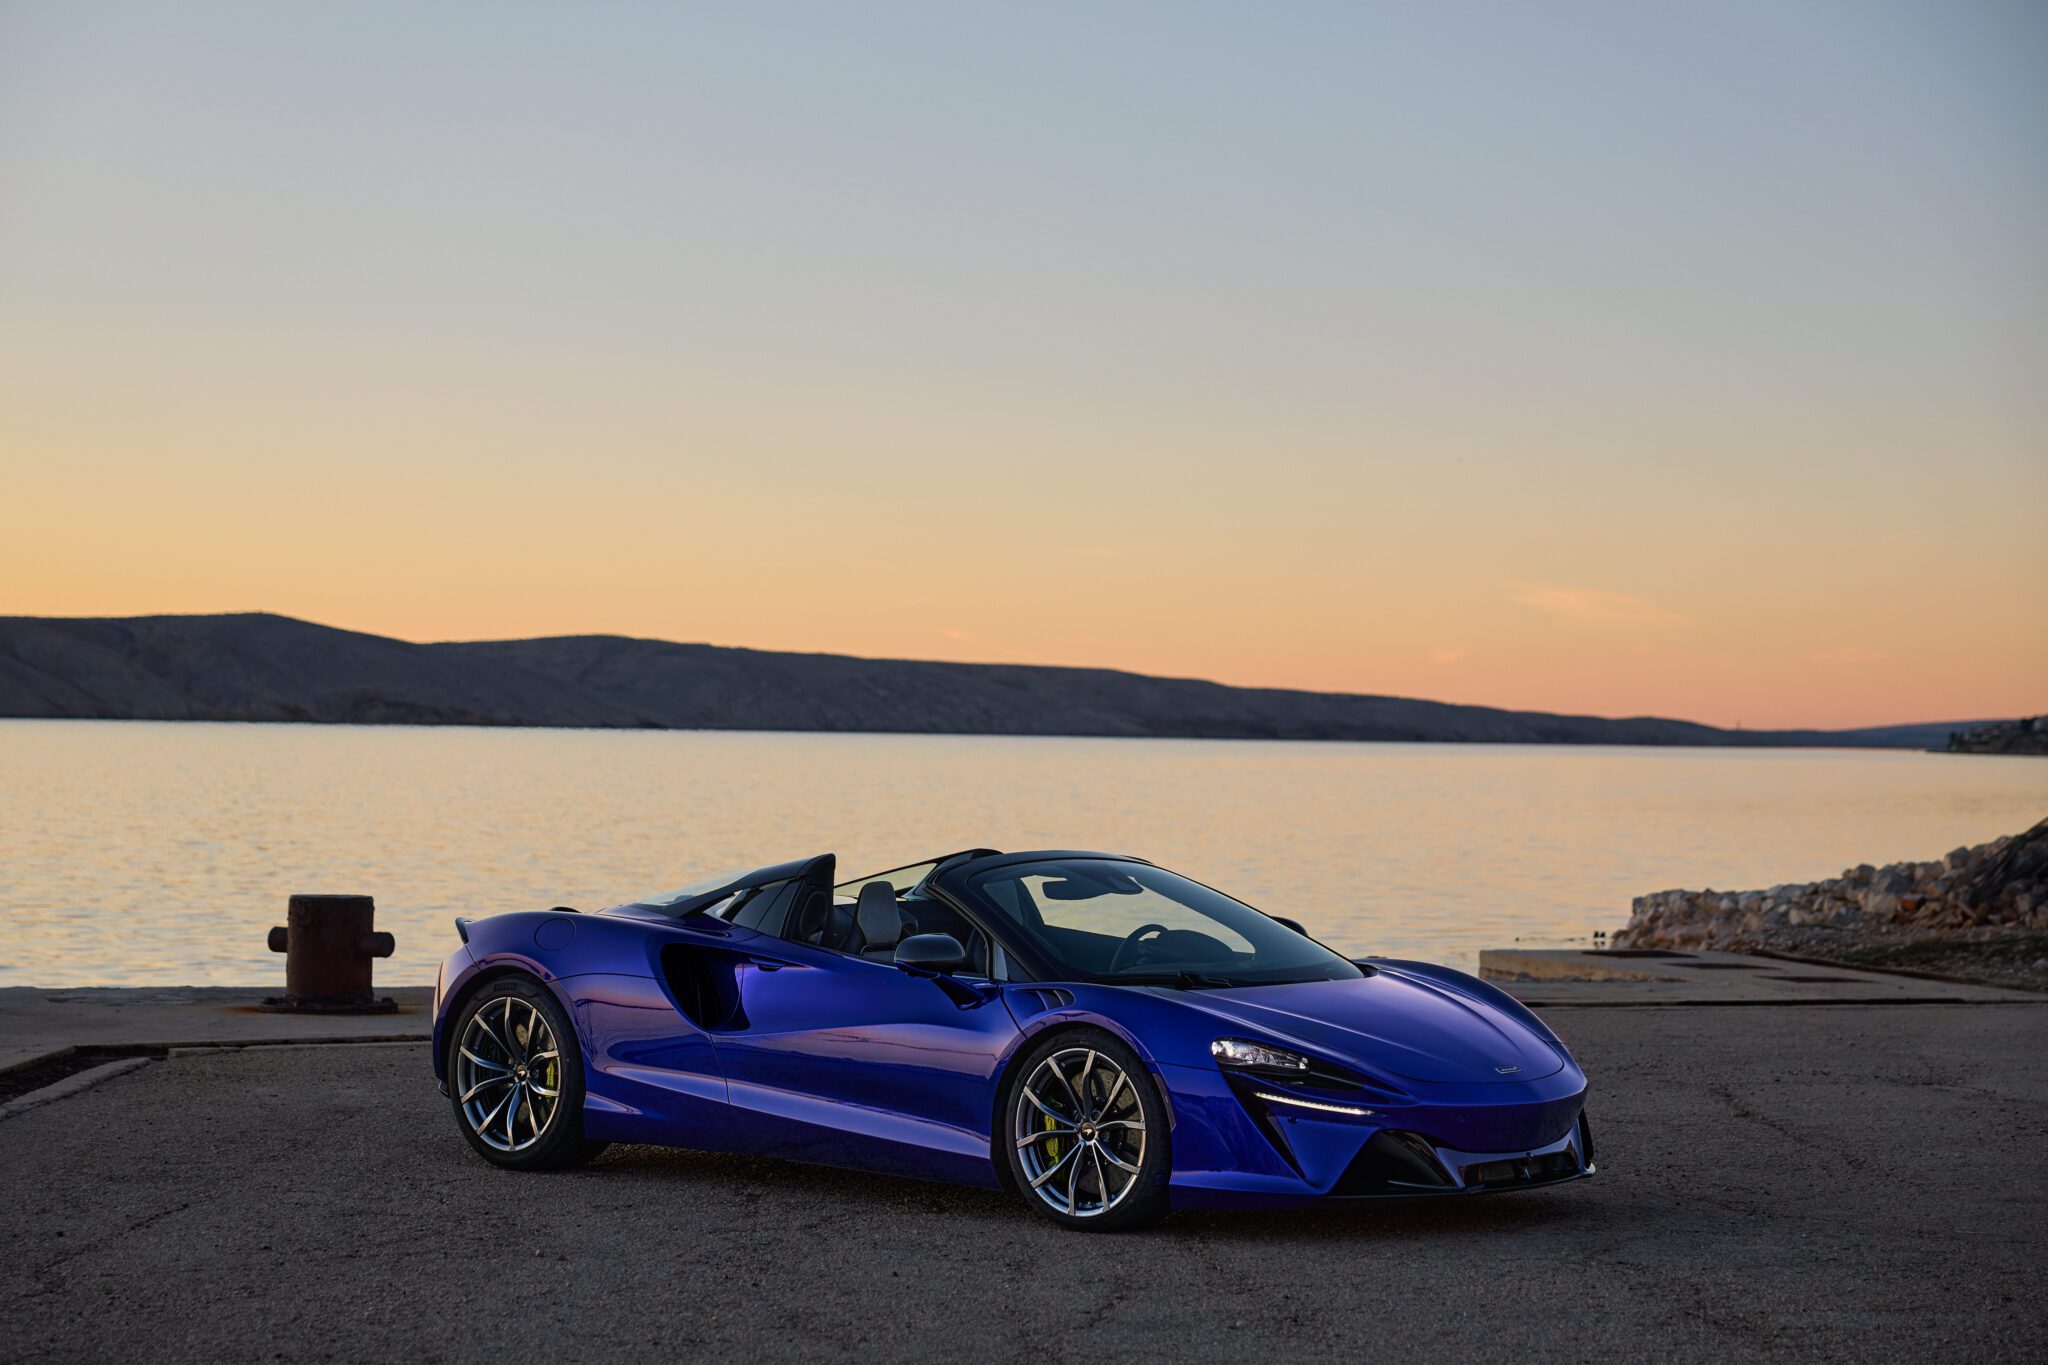 An image of a blue supercar parked outdoors.